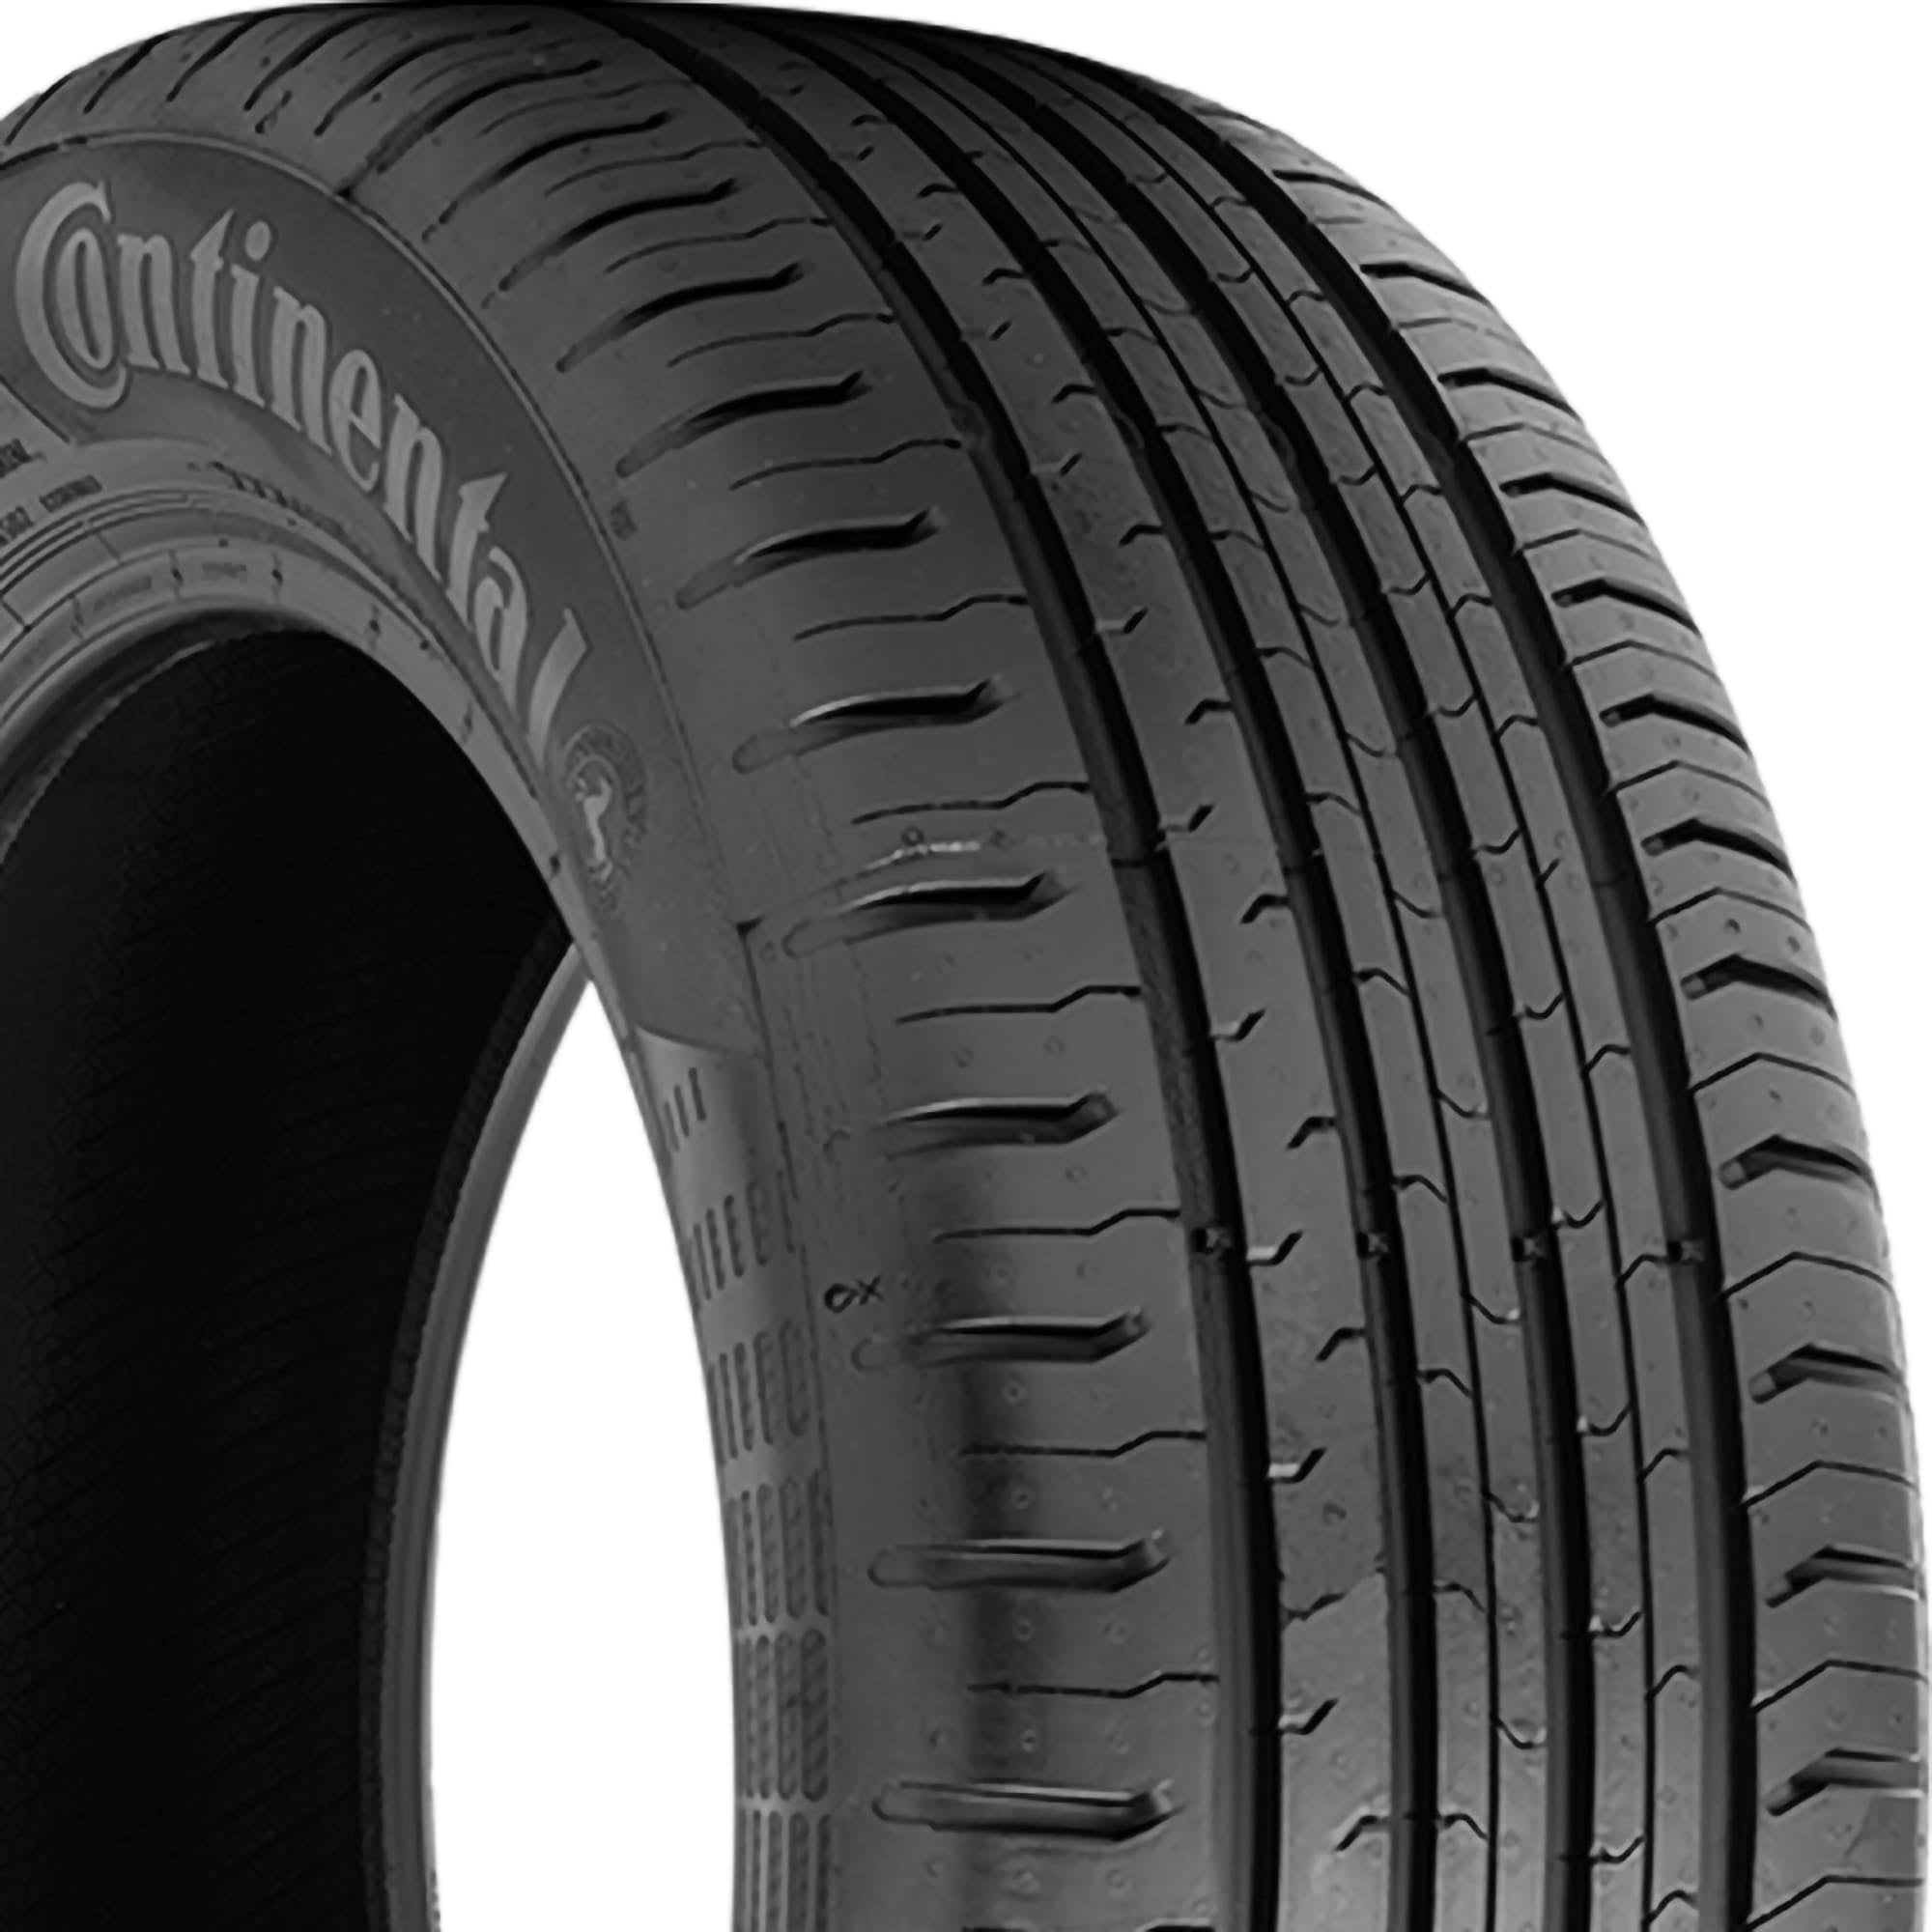 Mach 95Y 245/45R17 Tire Ford Mustang 2000 Continental ContiSportContact Ford Summer 1 Cobra Passenger SVT 5 Mustang R, Fits: 2003-04